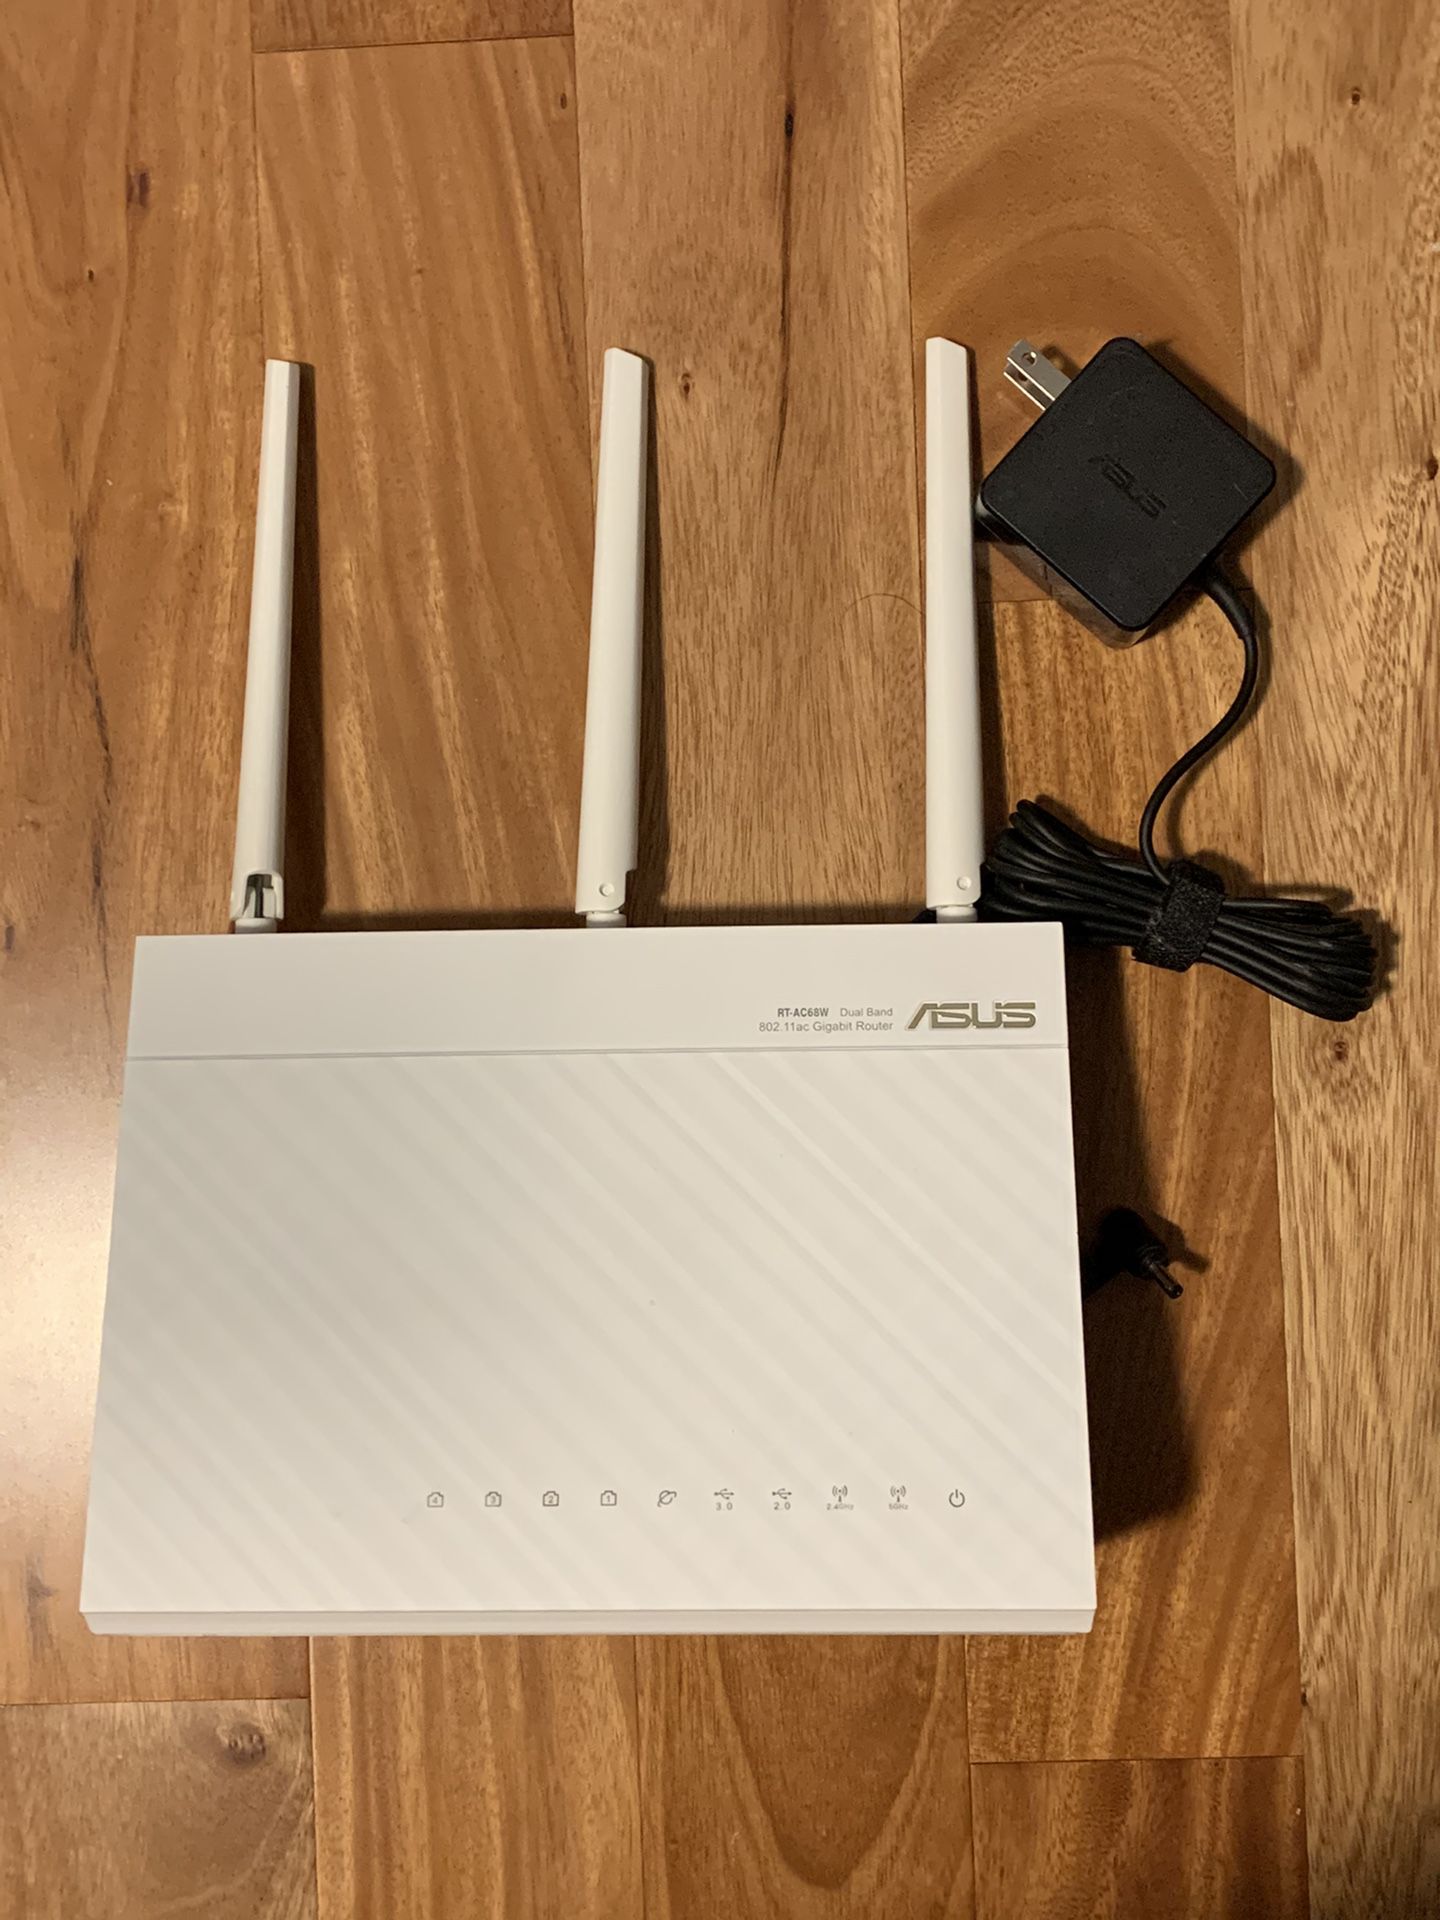 ASUS RT-AC68W wireless-AC1900 dual band gigabit router